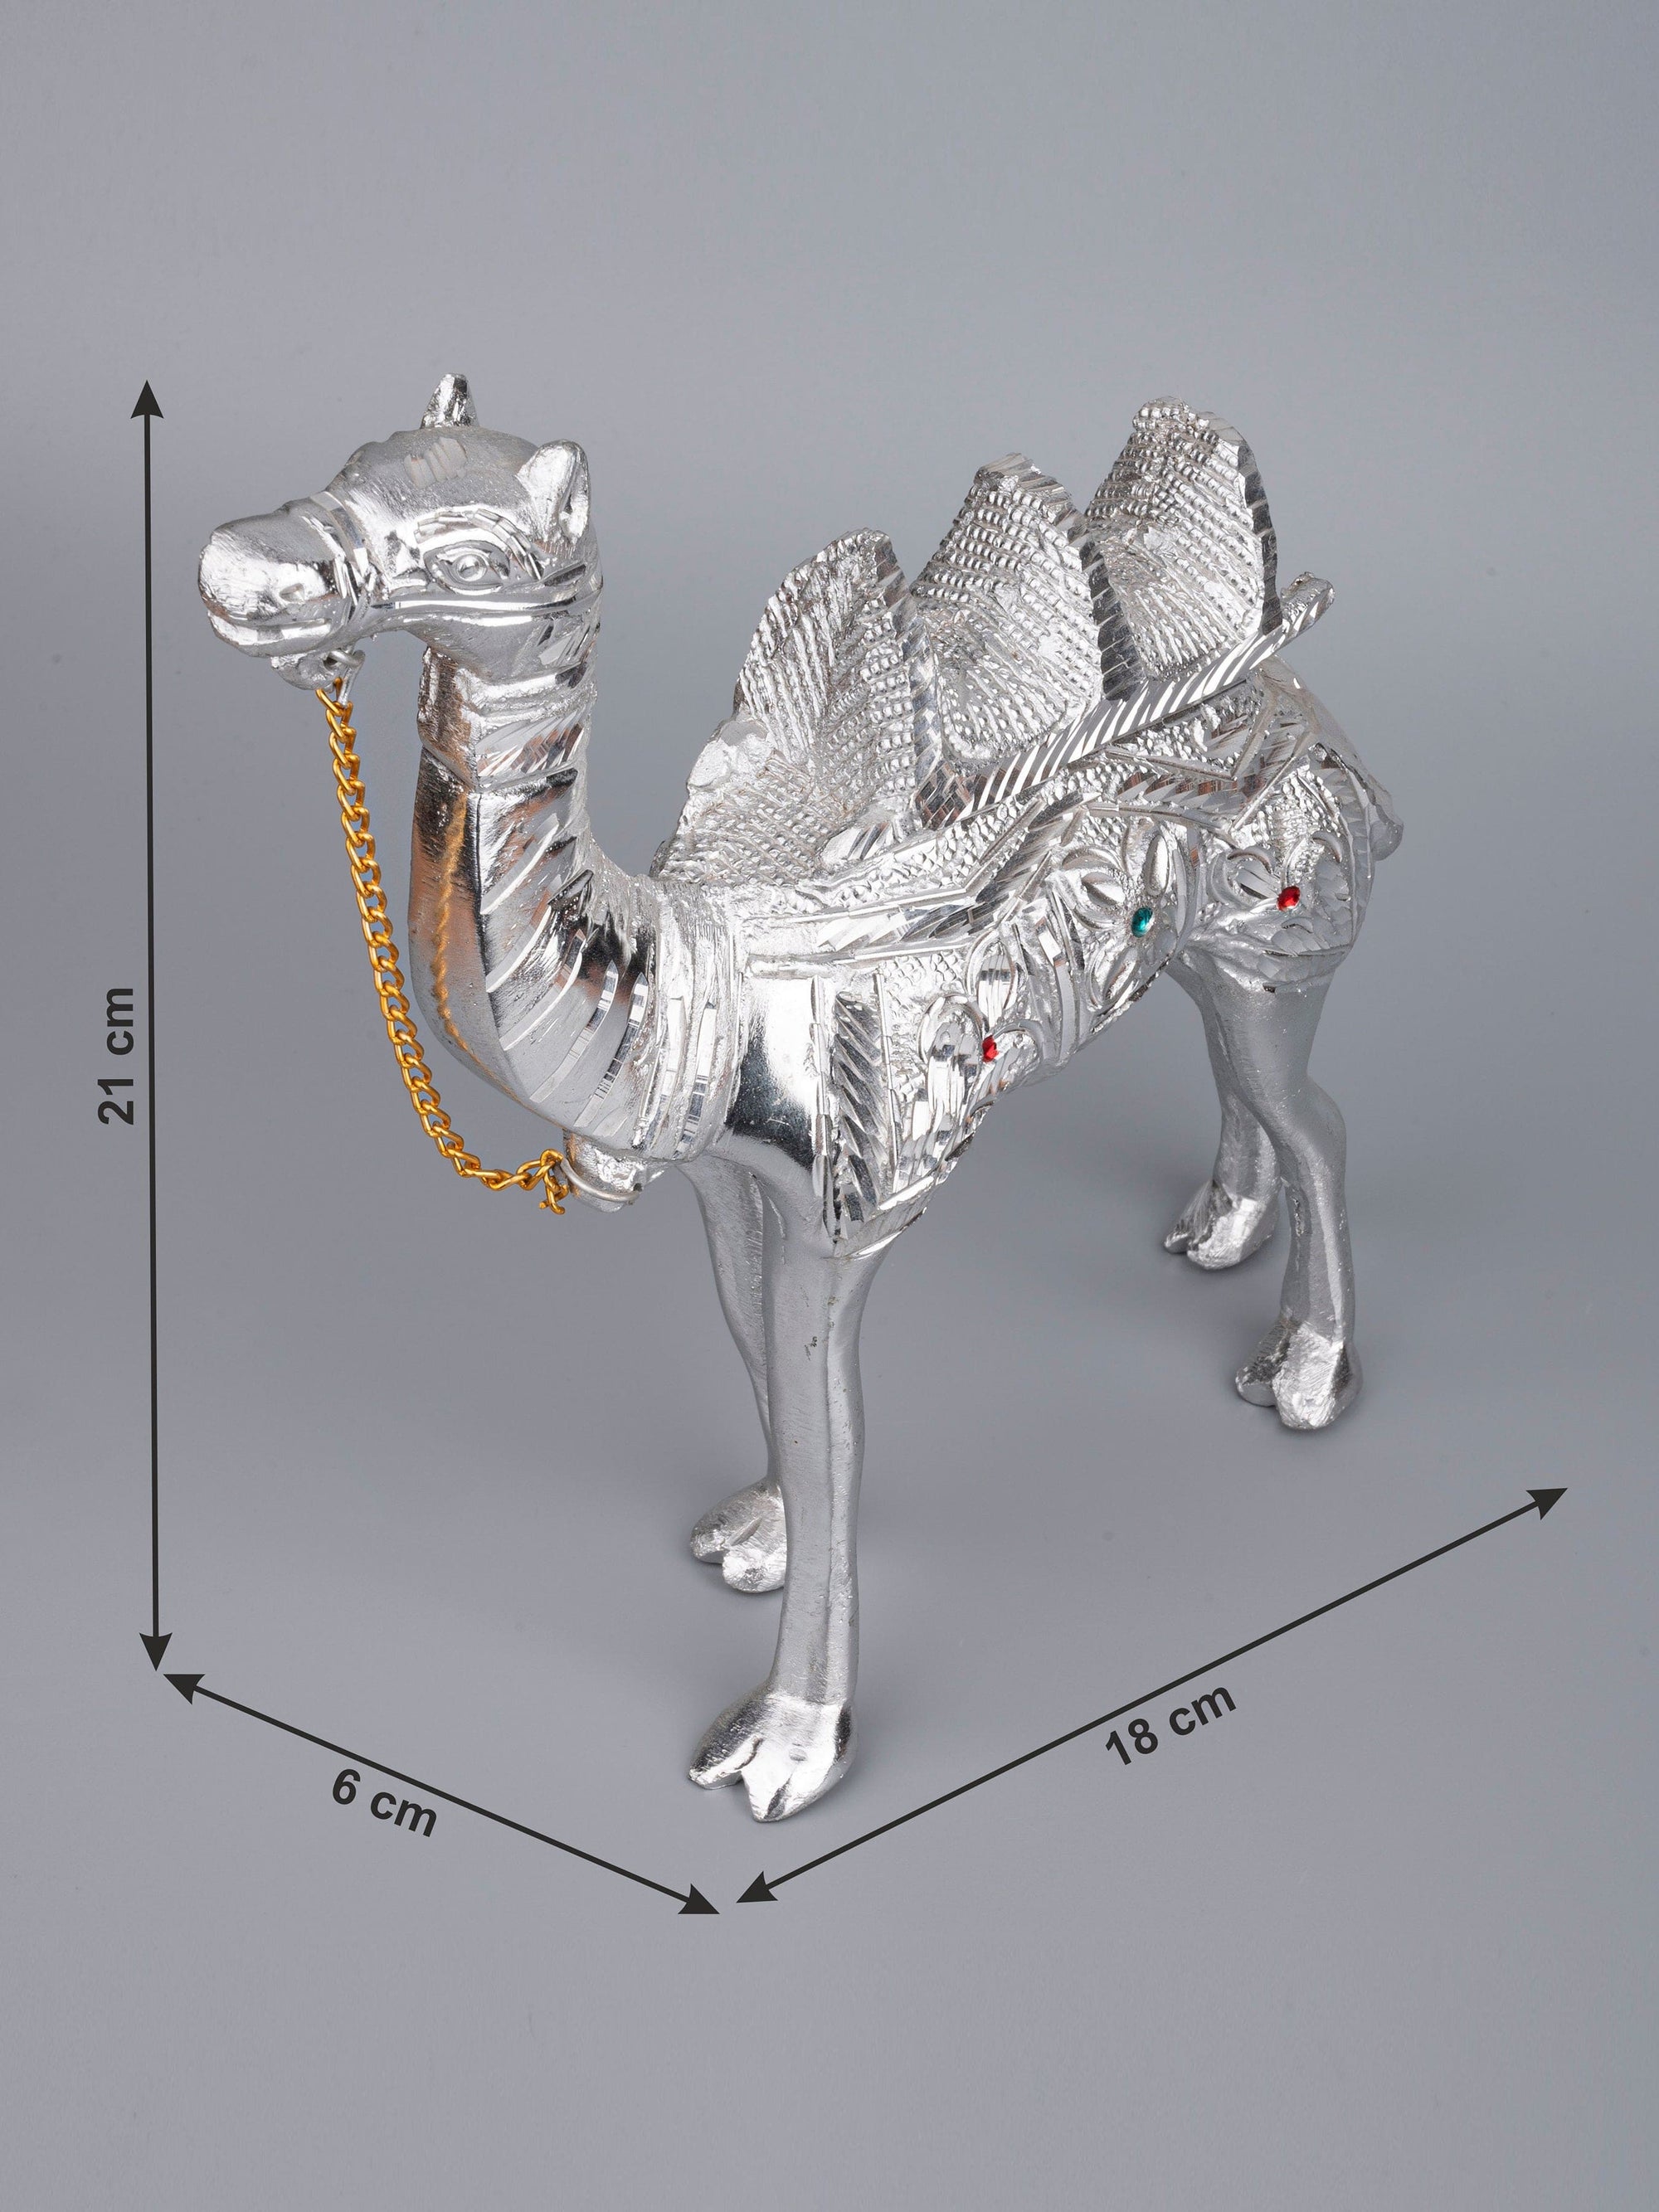 Zinc Metal Handcrafted Rajasthan Camel Decorative Showpiece - 8 inches height - The Heritage Artifacts